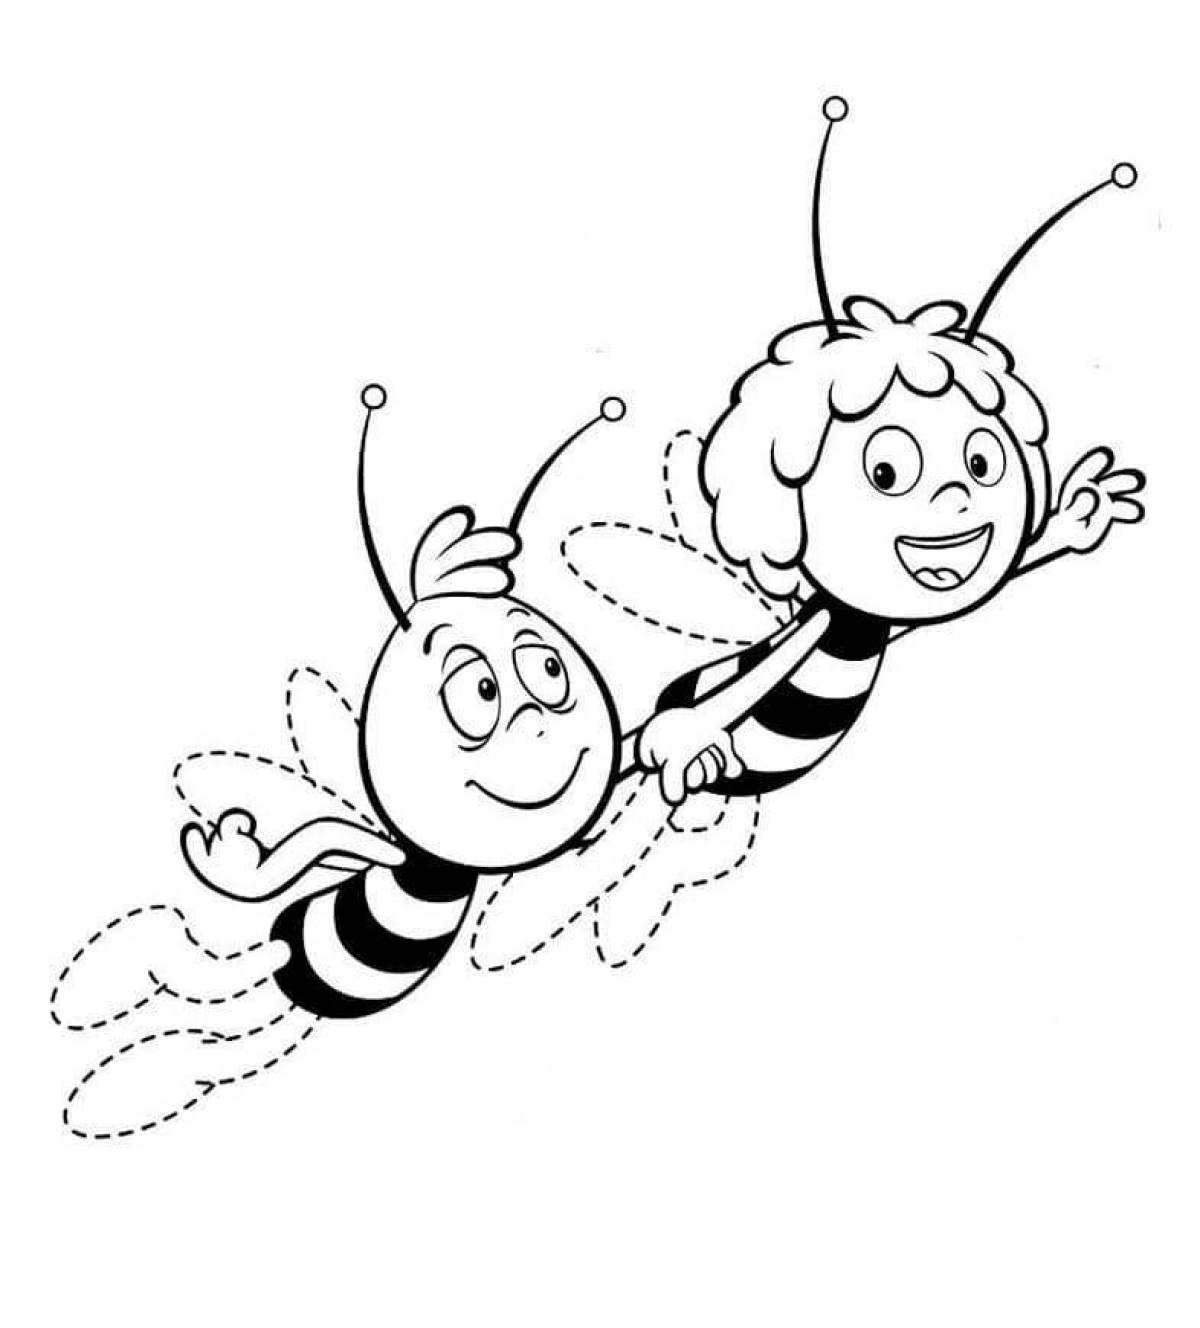 Bright bee coloring page